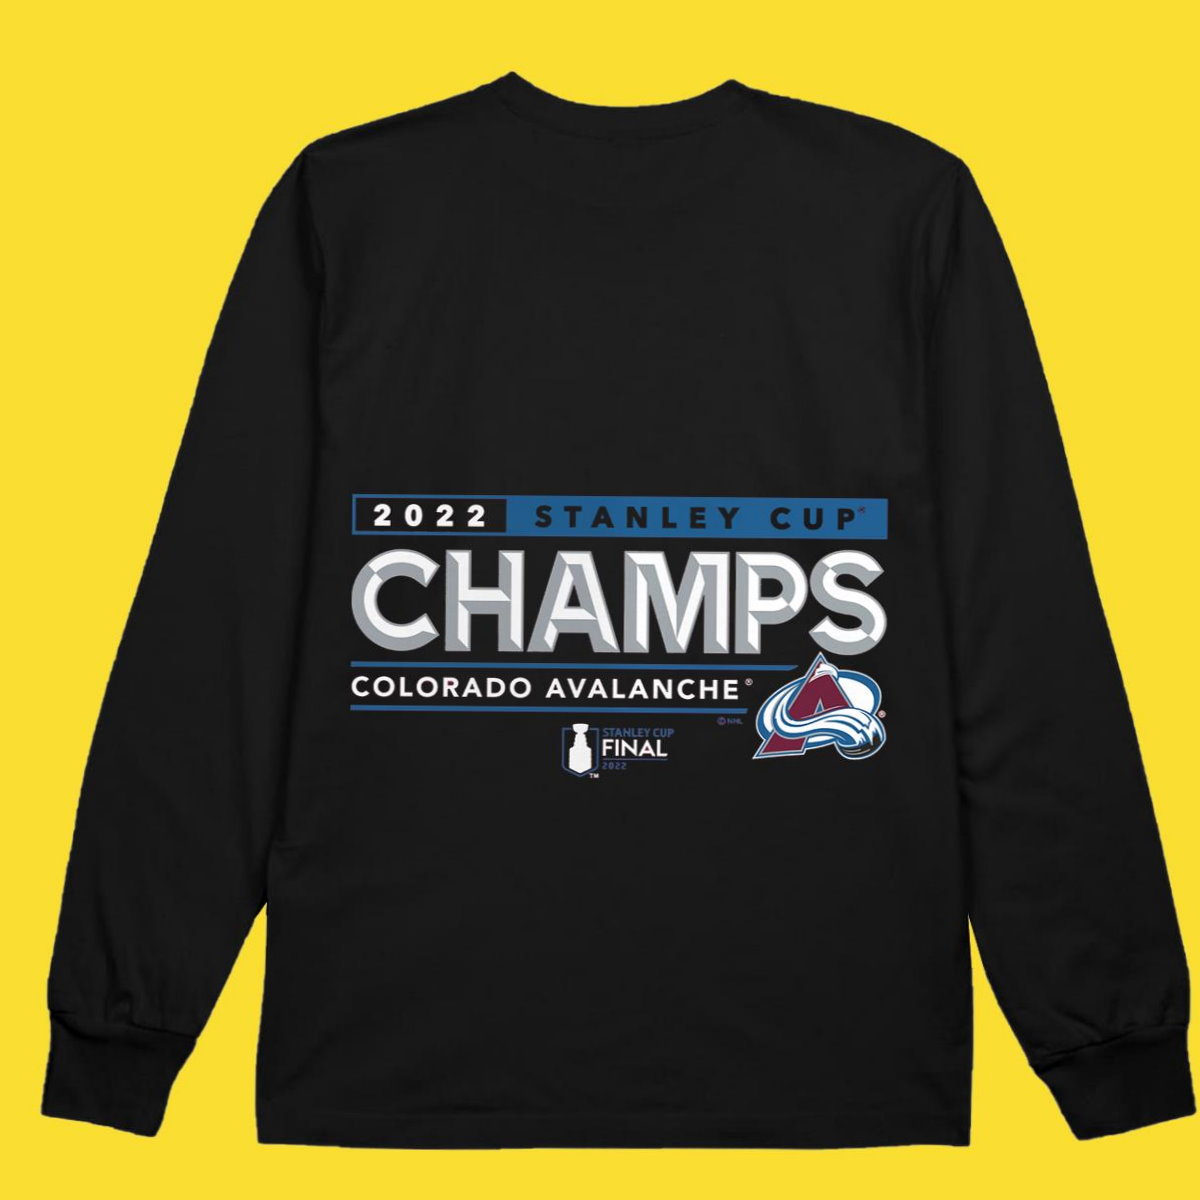 Colorado Avalanche 2022 Stanley Cup Finals Champions Hockey black t-shirt